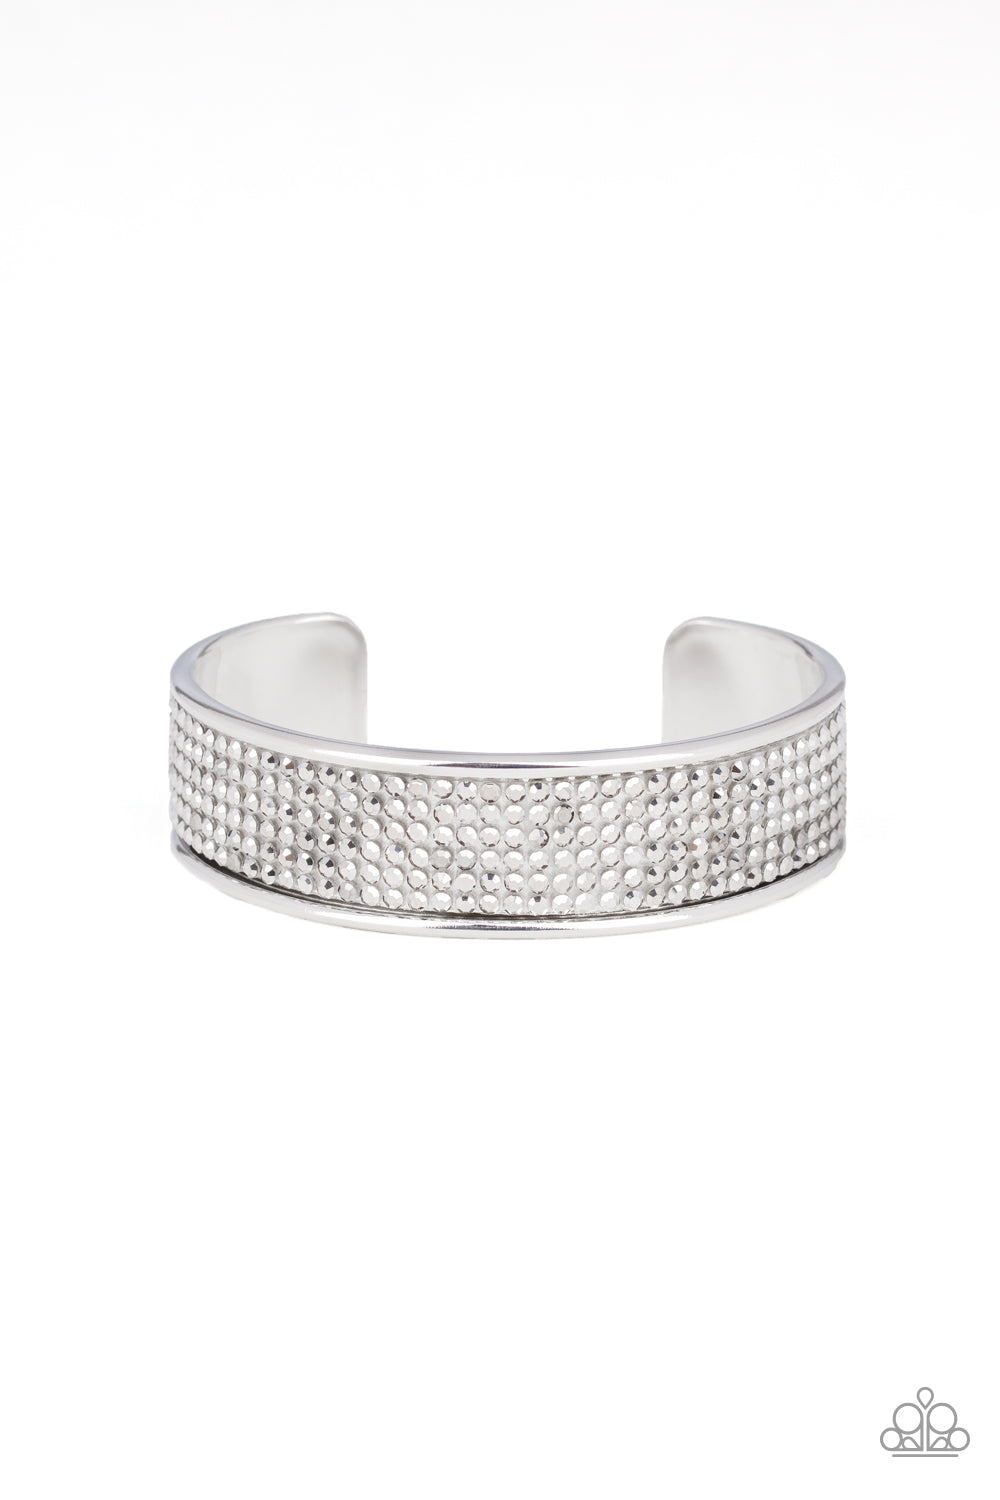 Can't Believe Your ICE Bracelet (White, Silver)